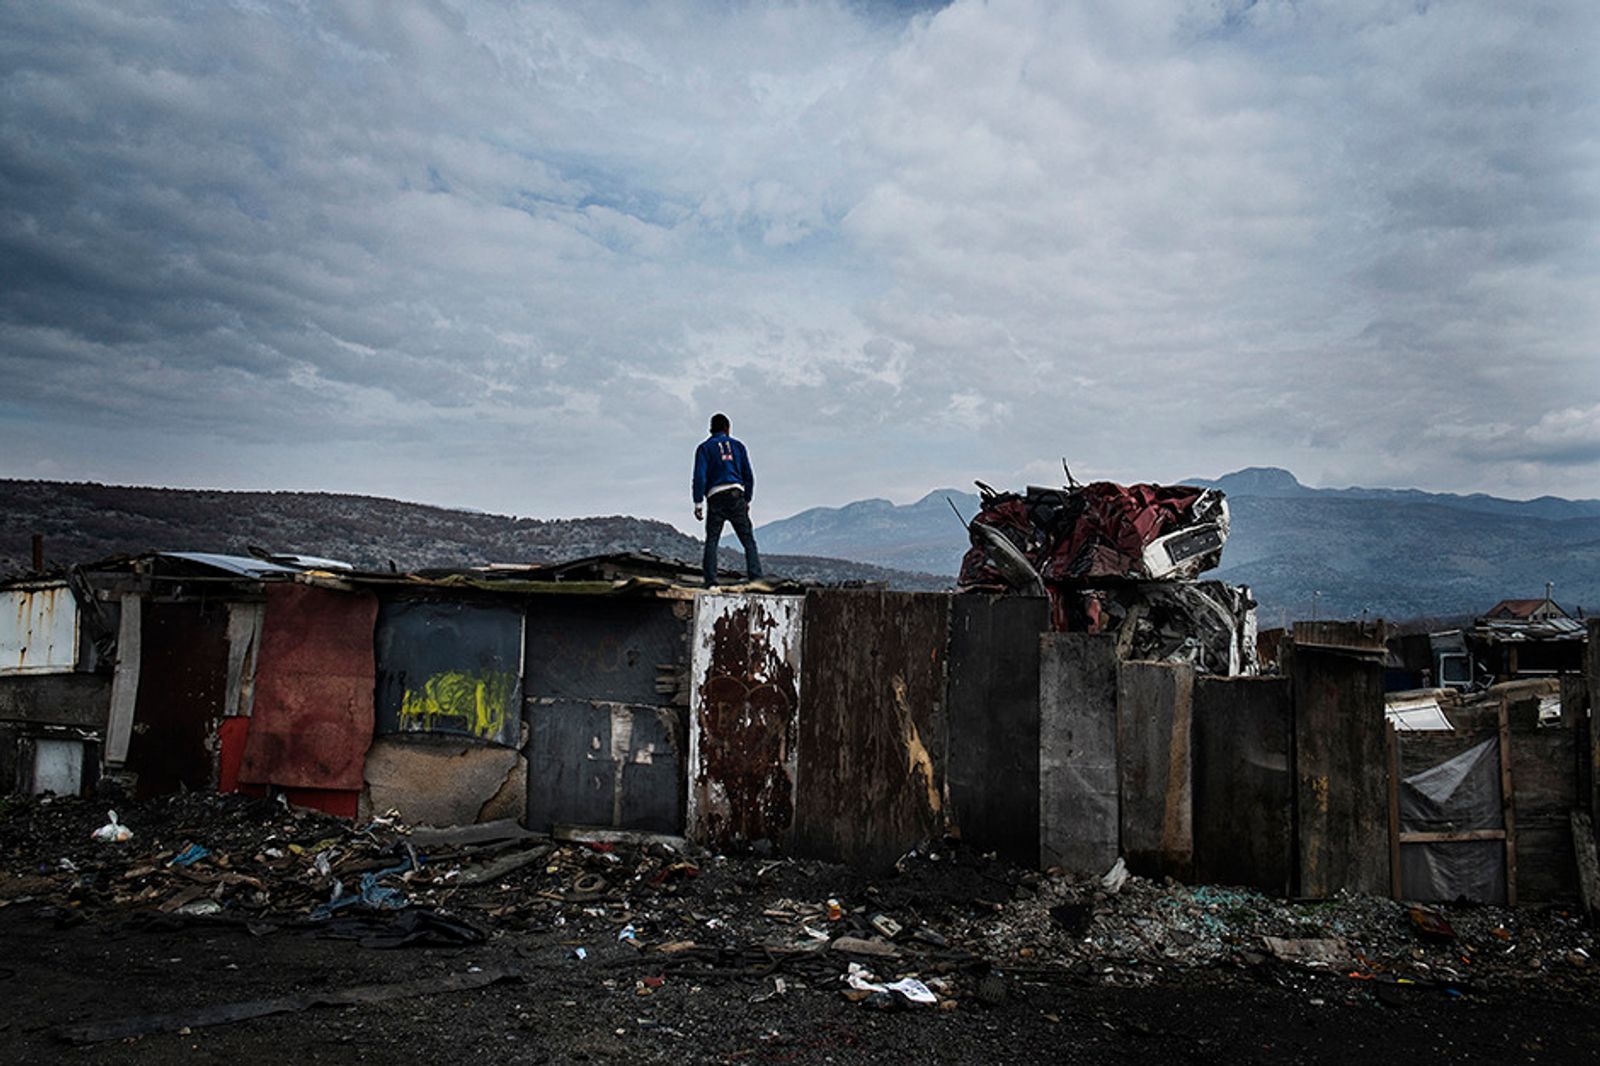 © Gianmarco Maraviglia - Image from the Konic - 15 years after the war in Kosovo photography project